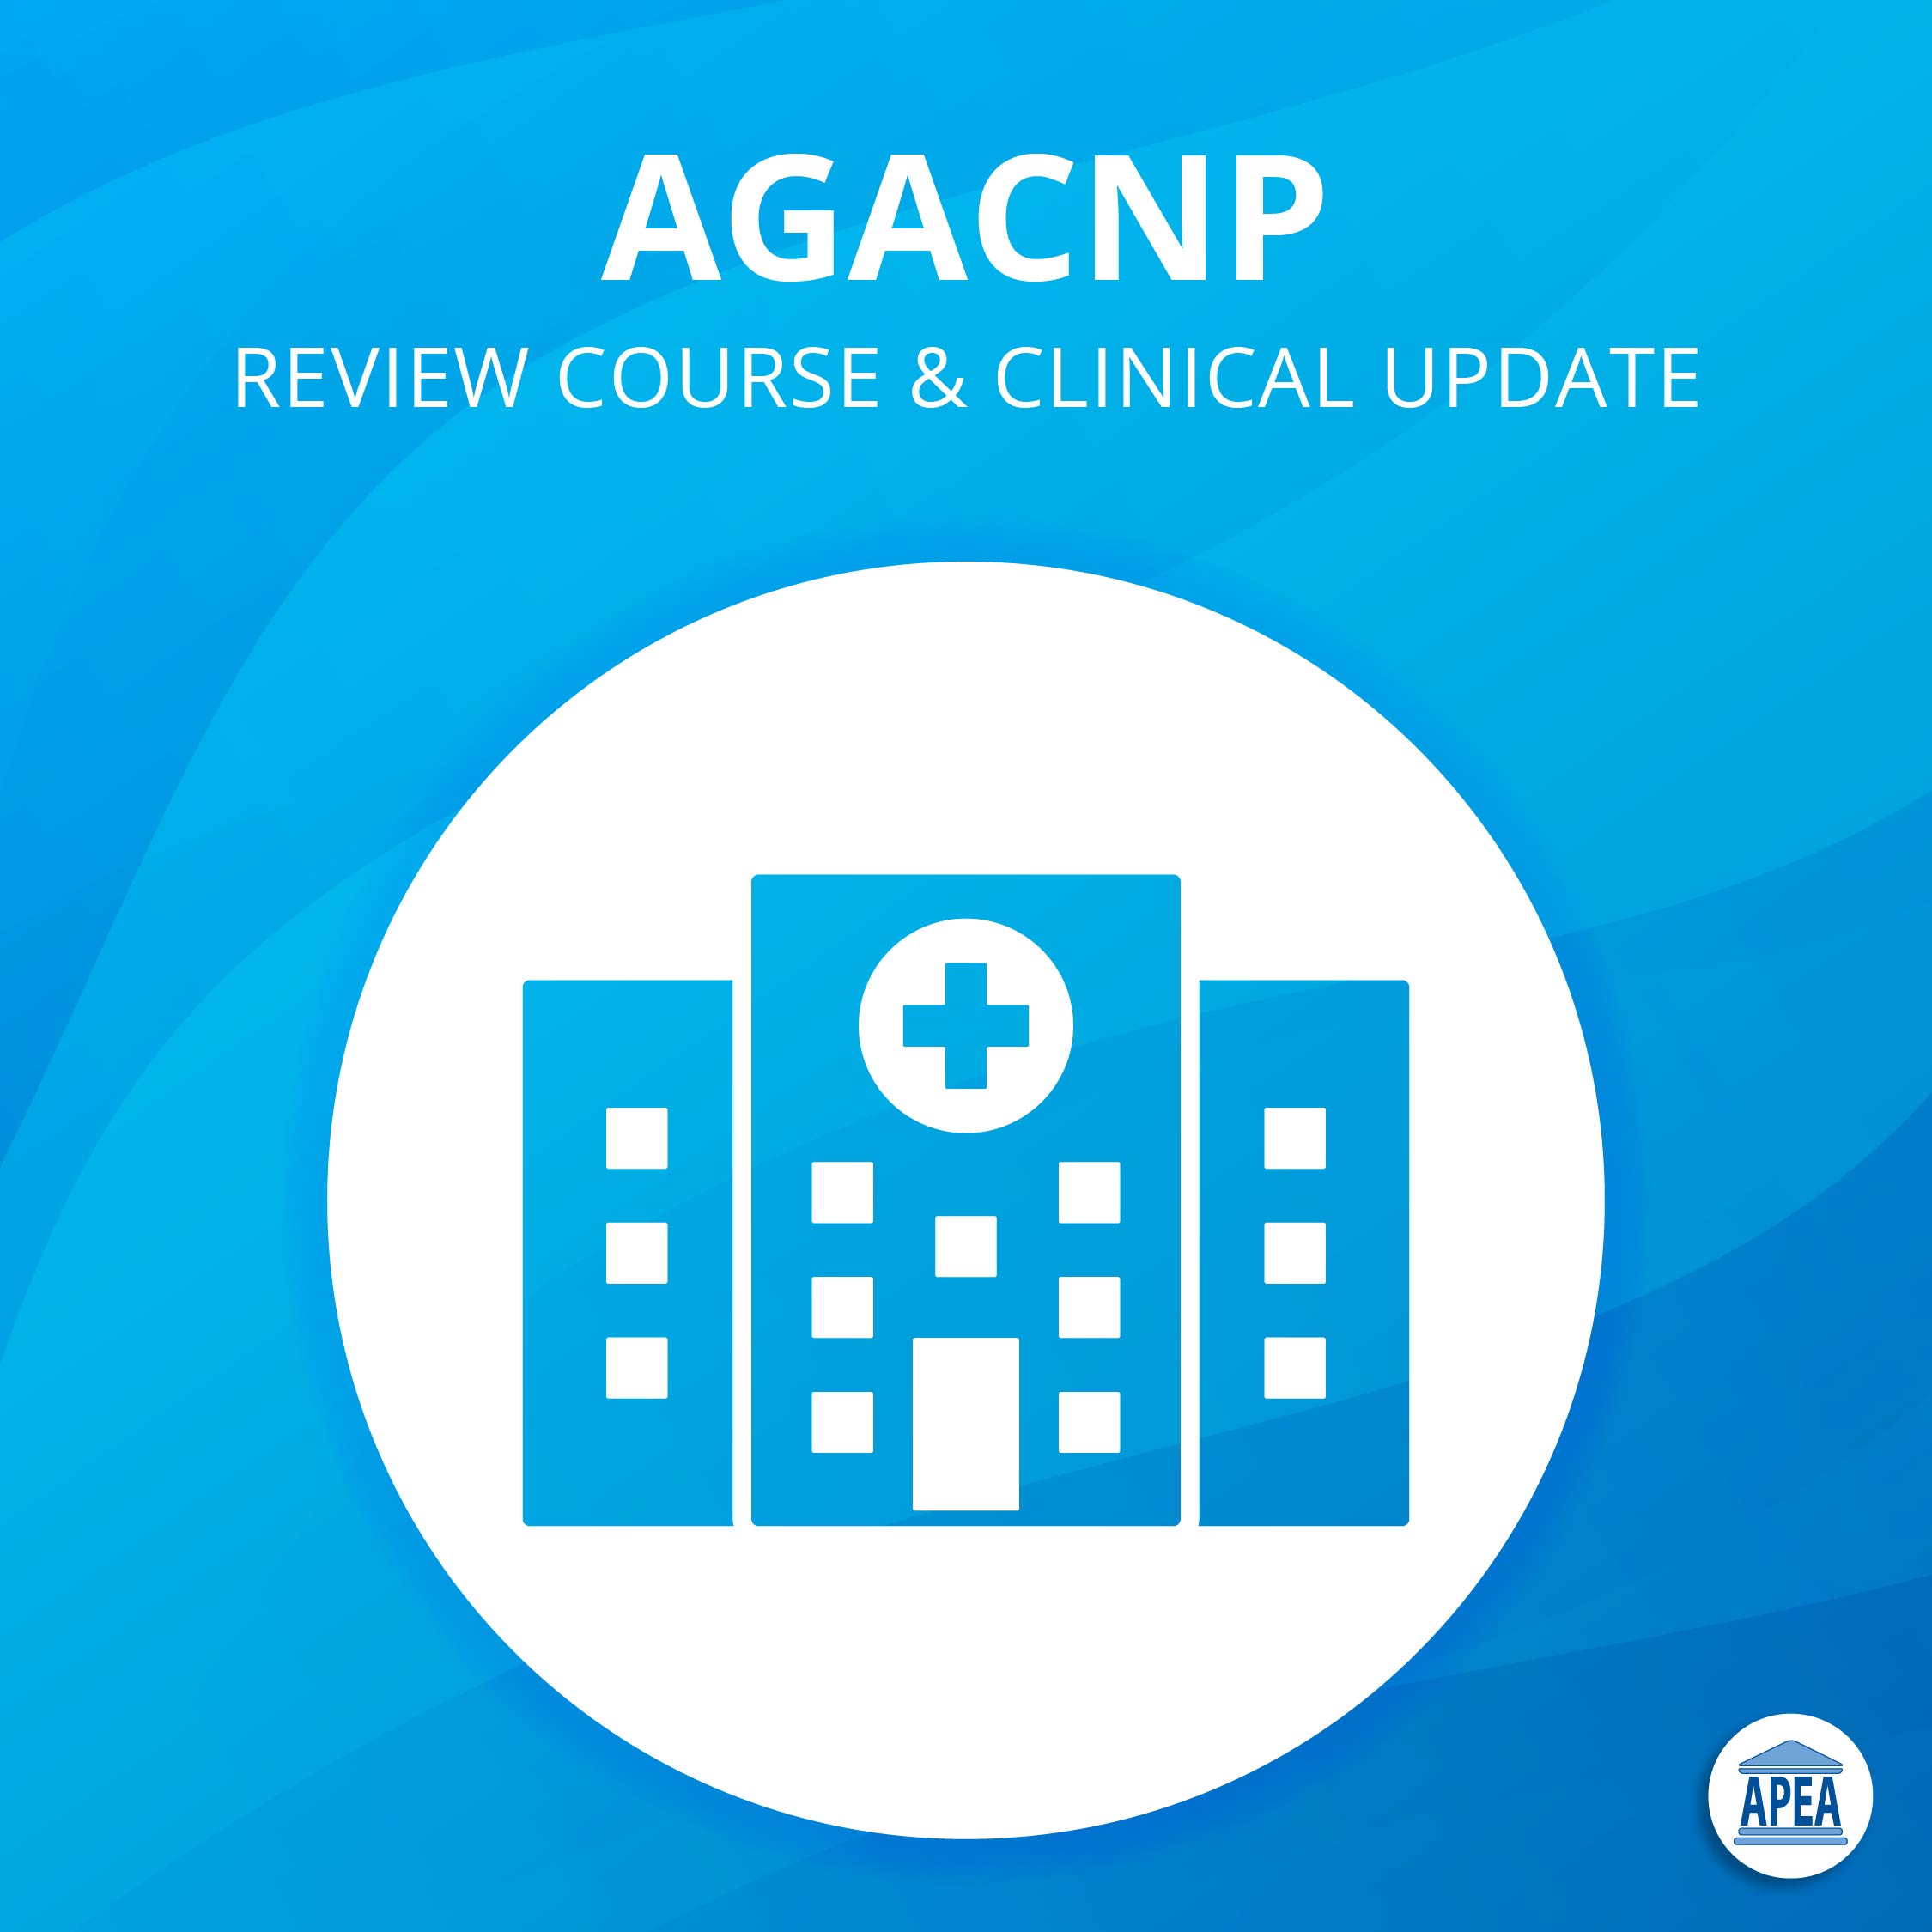 AGACNP Review Course & Clinical Update